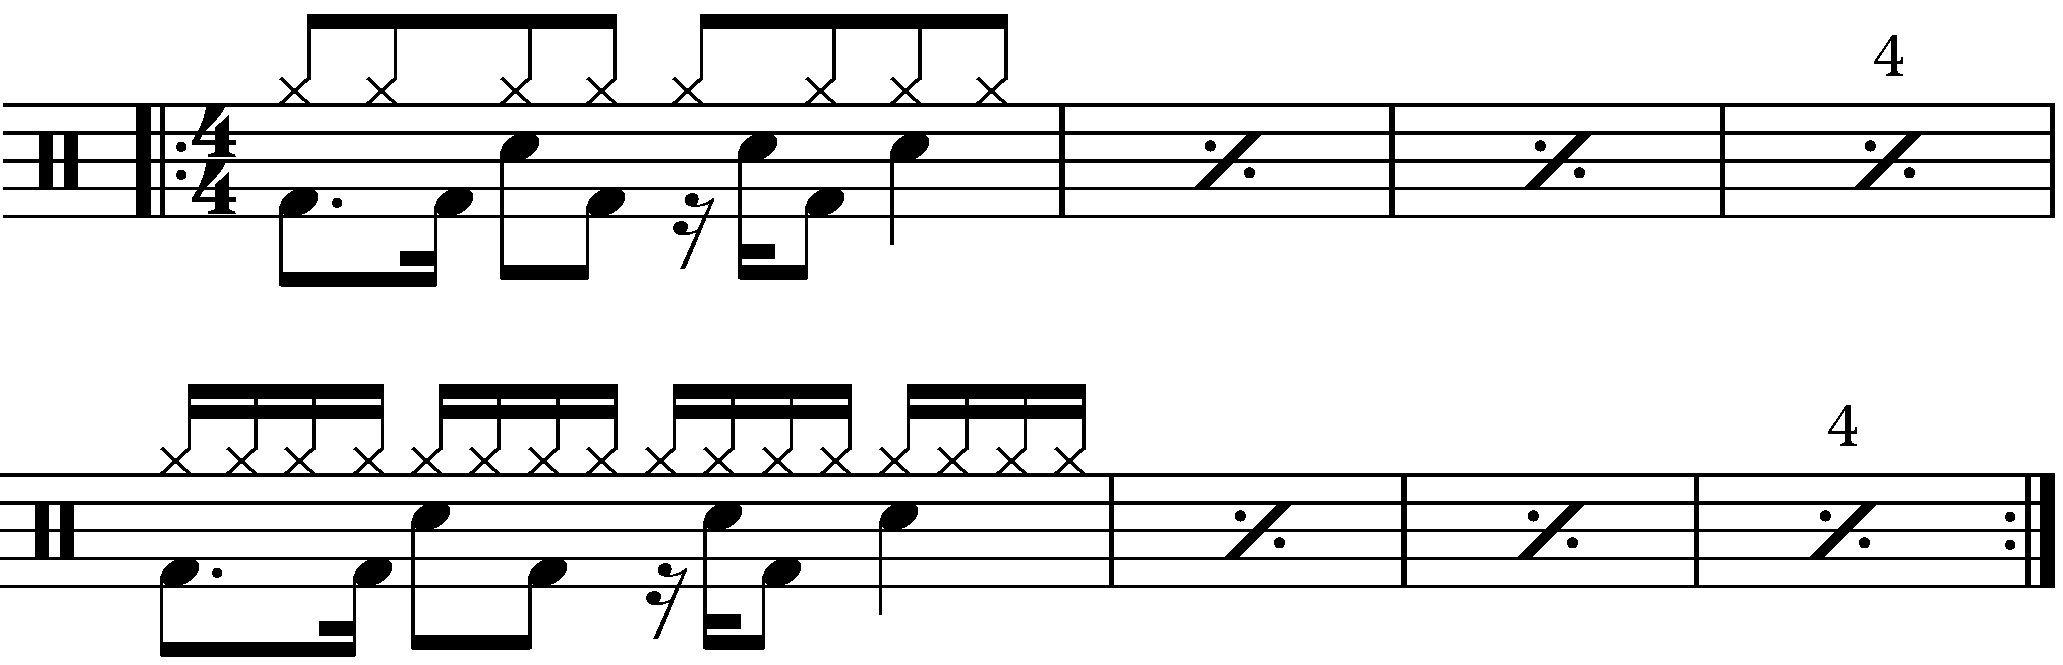 Changing the rhythm every four bars.